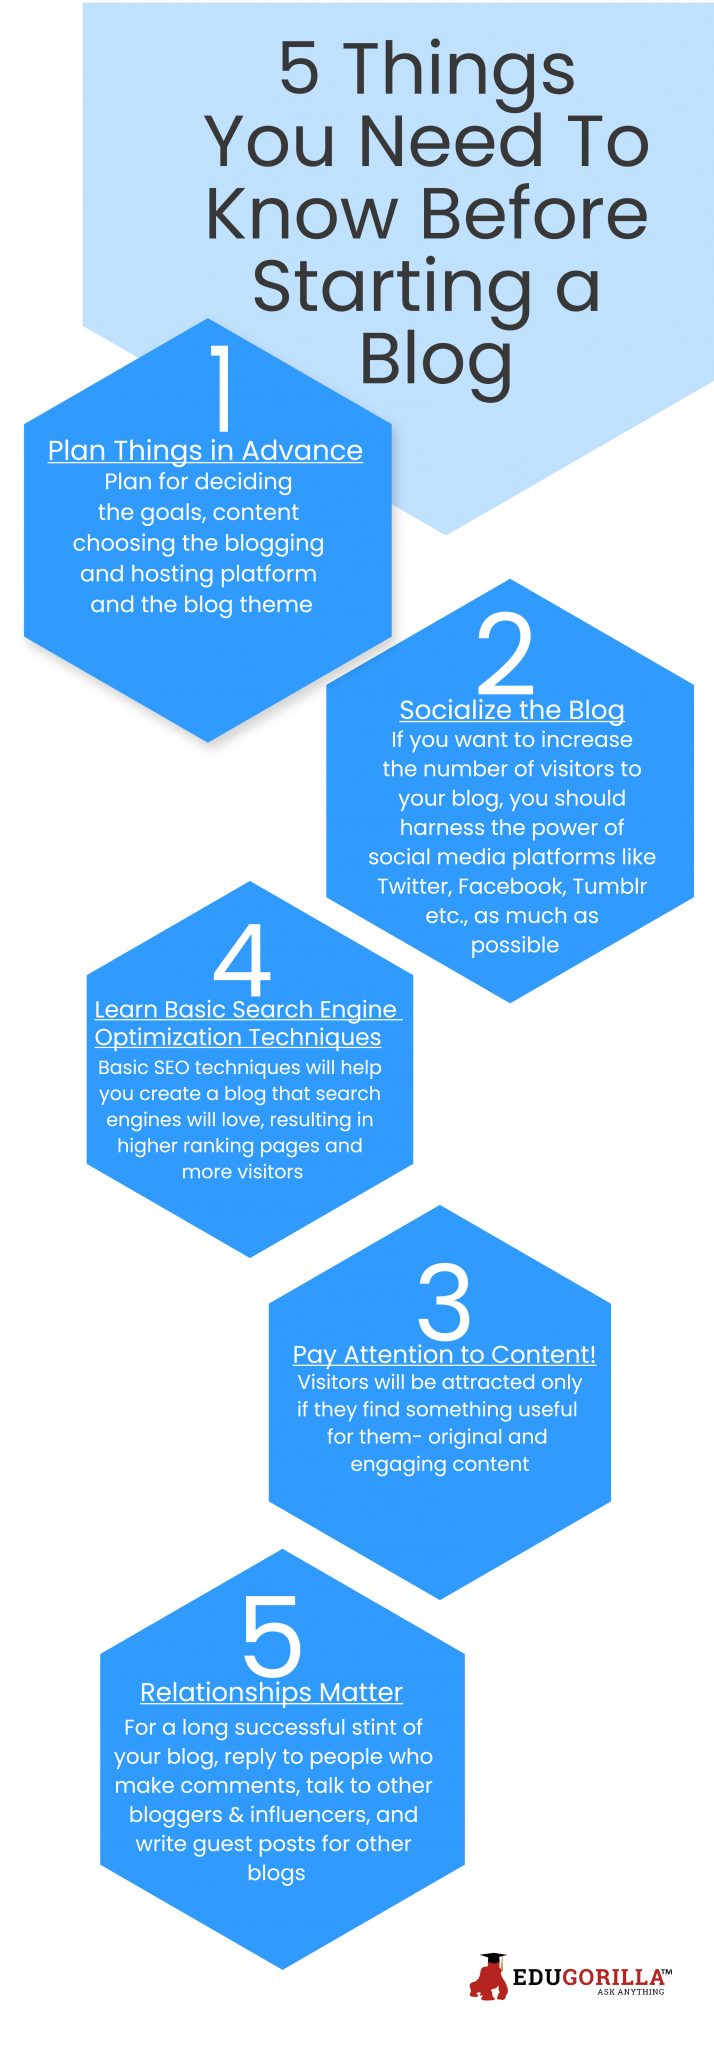 5 things you need to know before starting a blog